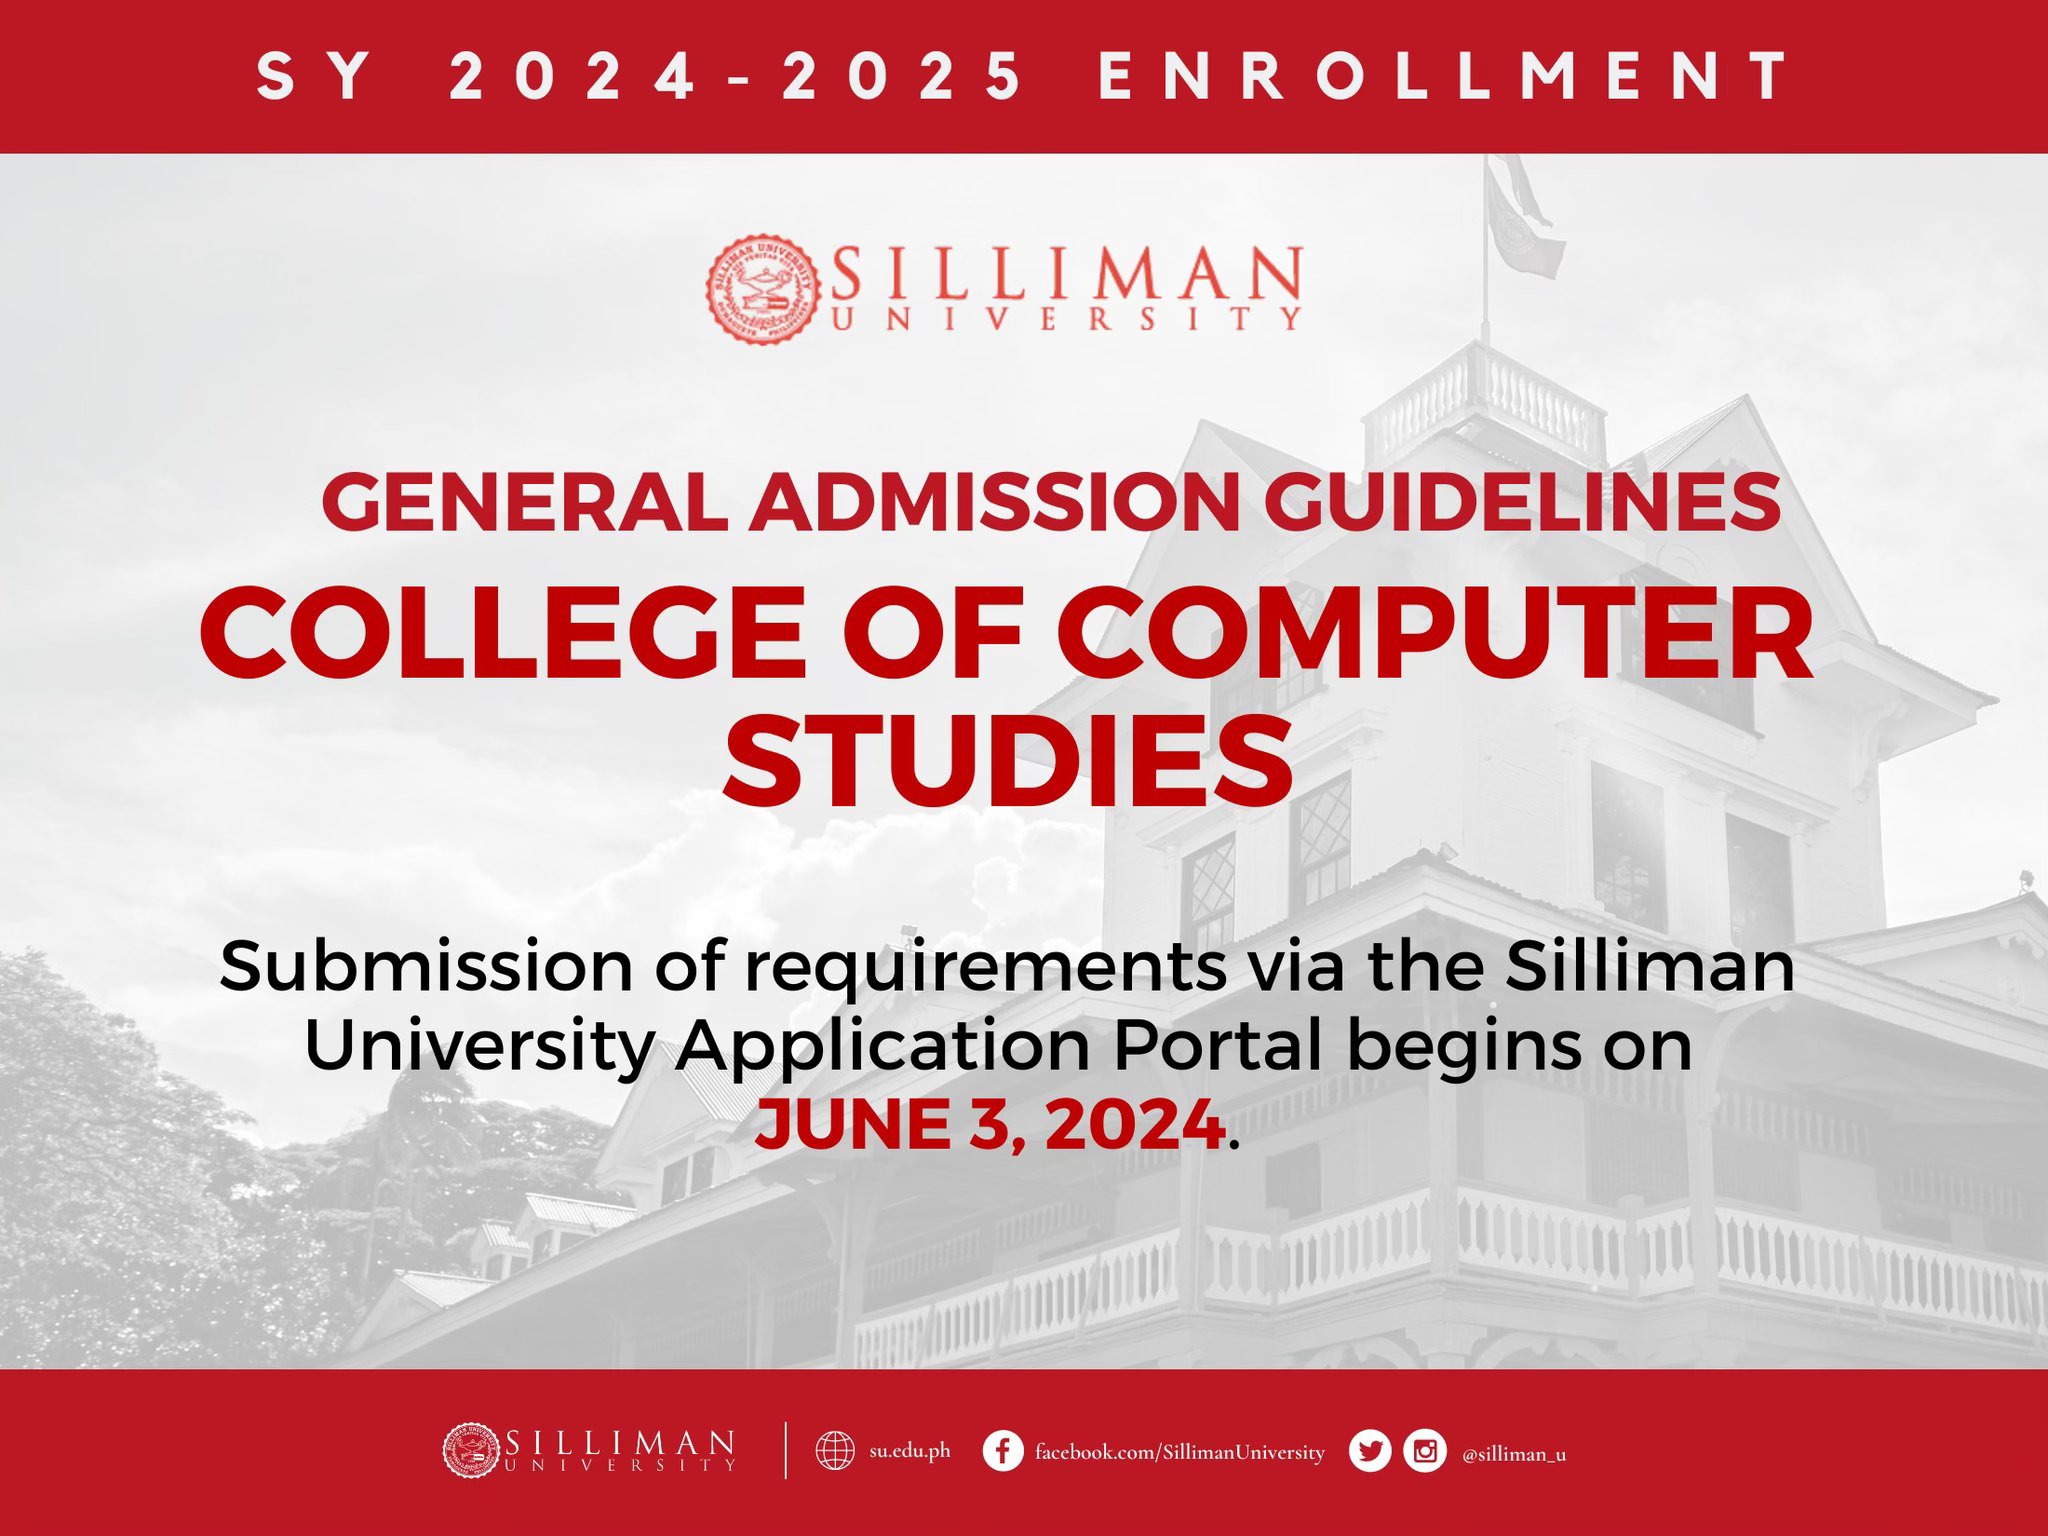 College of Computer Studies (CCS) is announcing its General Admission Guidelines